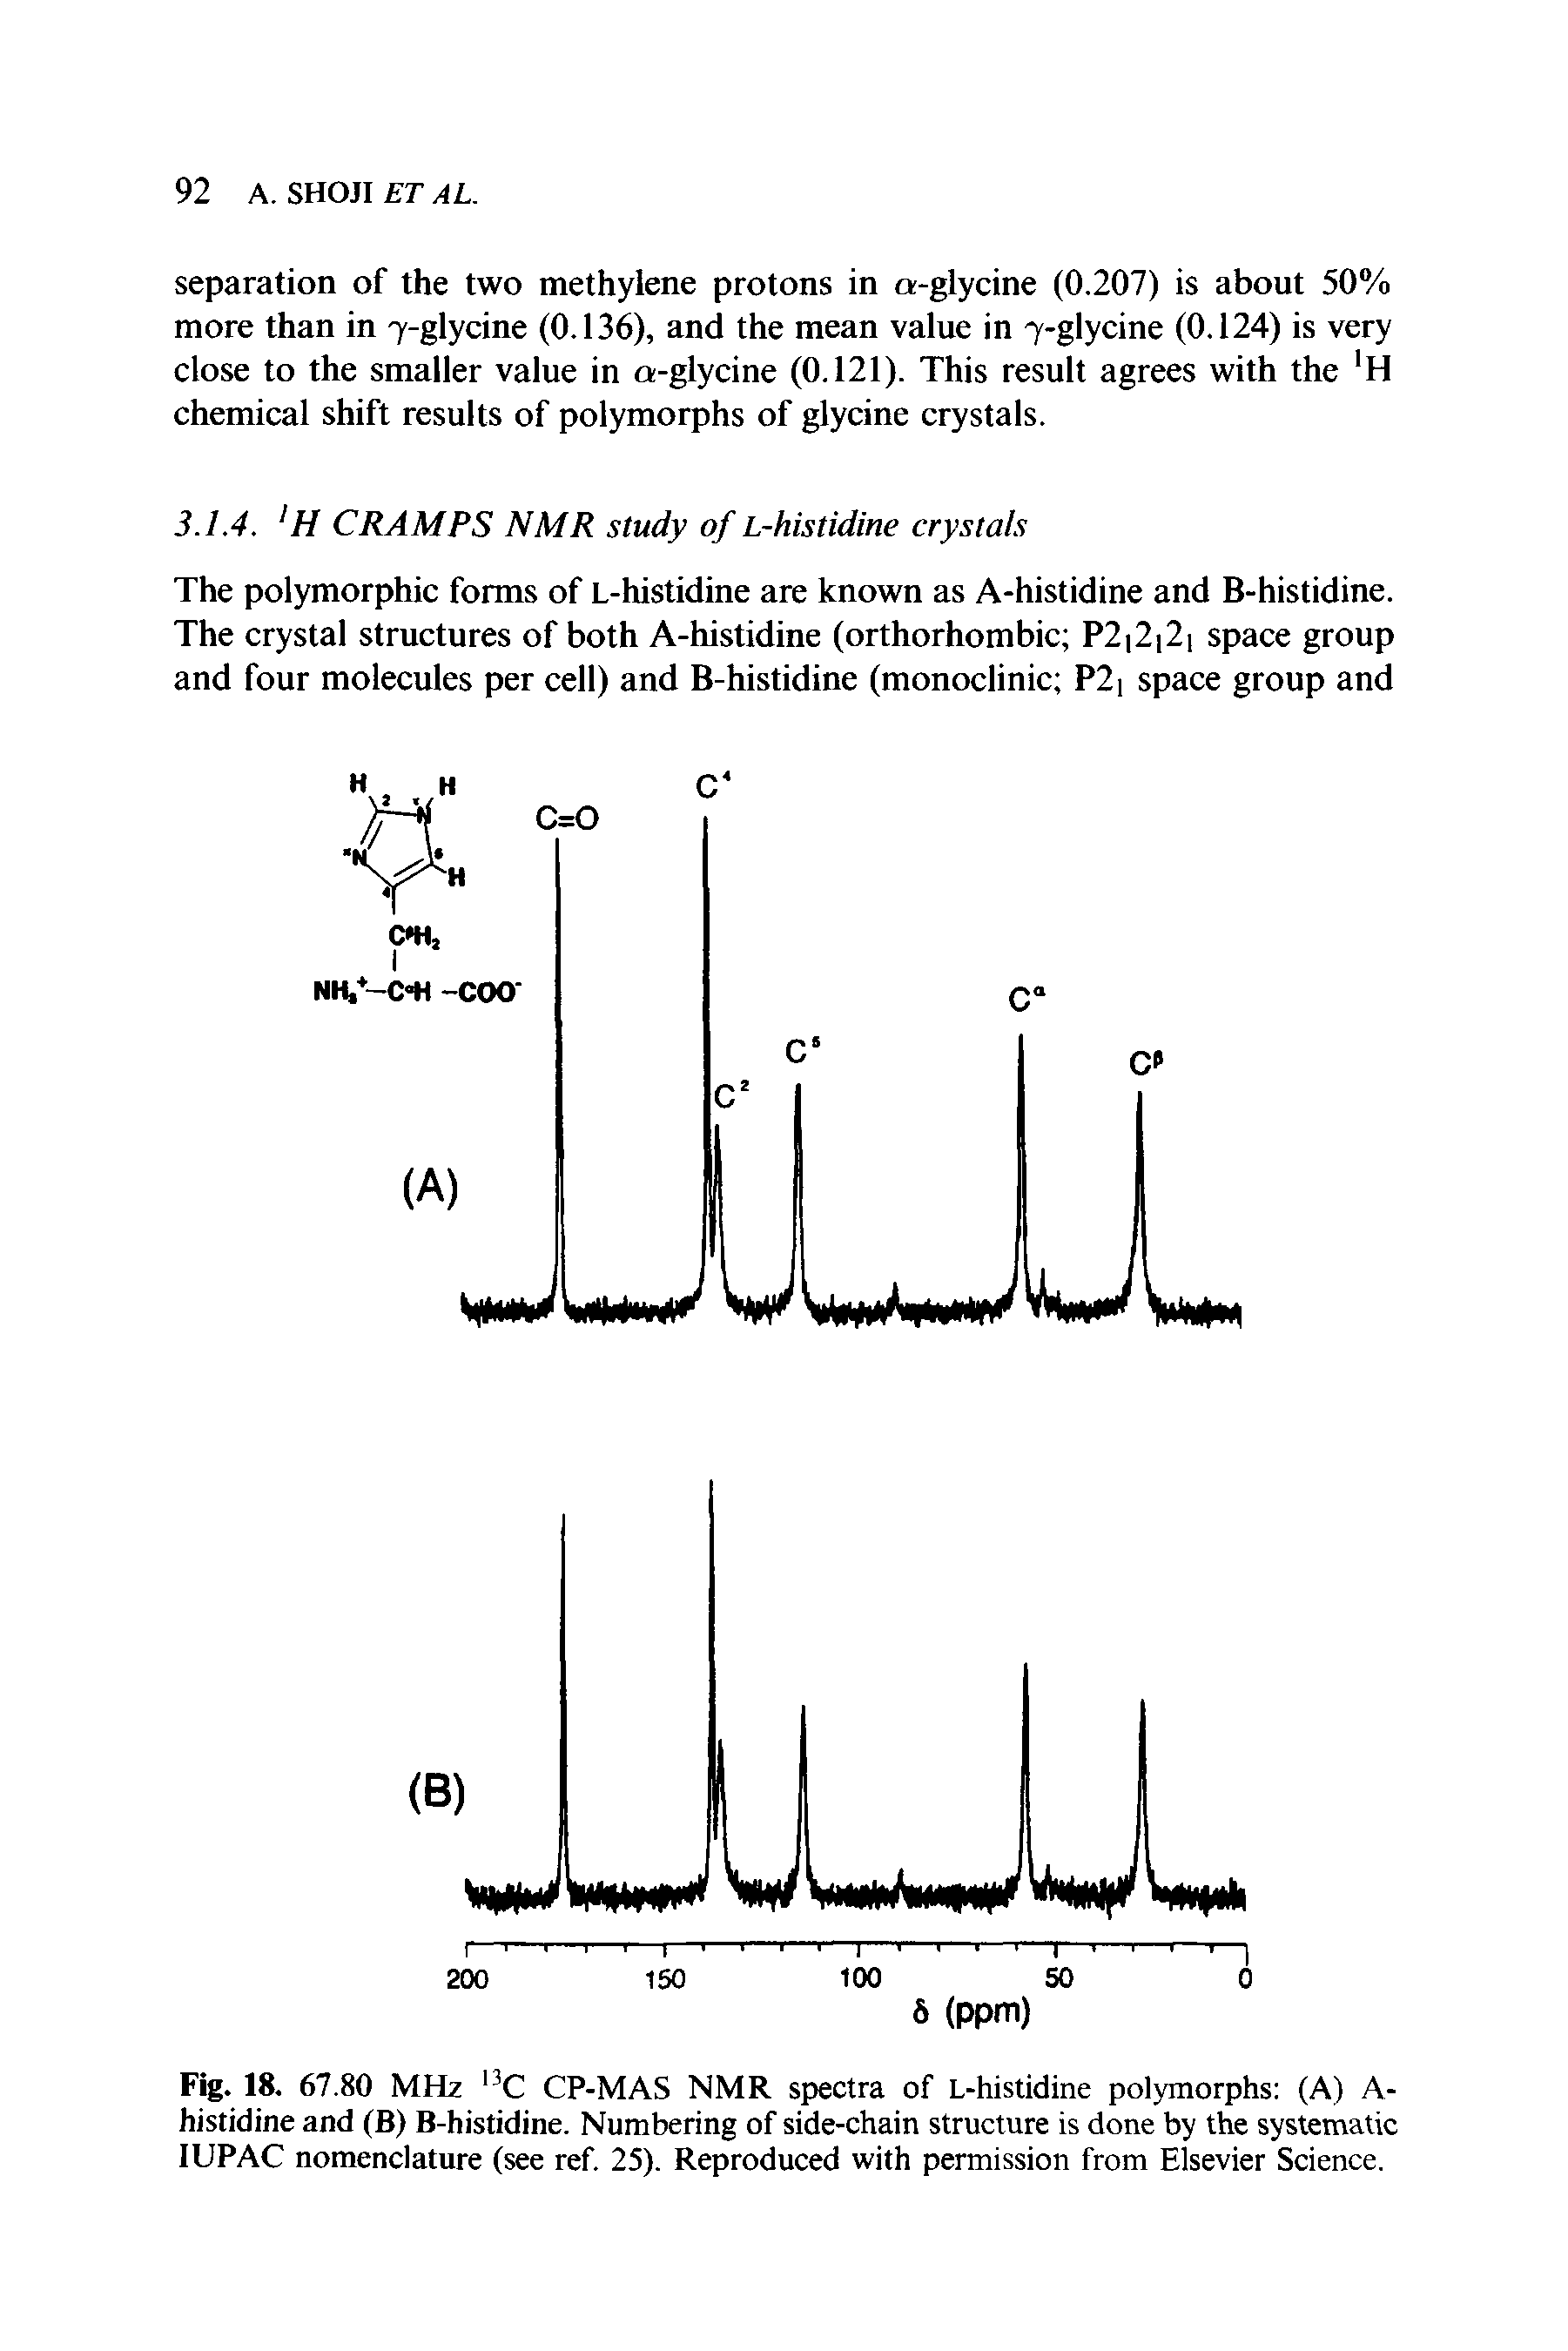 Fig. 18, 67.80 MHz C CP-MAS NMR spectra of L-histidine polymorphs (A) A-histidine and (B) B-histidine. Numbering of side-chain structure is done by the systematic lUPAC nomenclature (see ref. 25). Reproduced with permission from Elsevier Science.